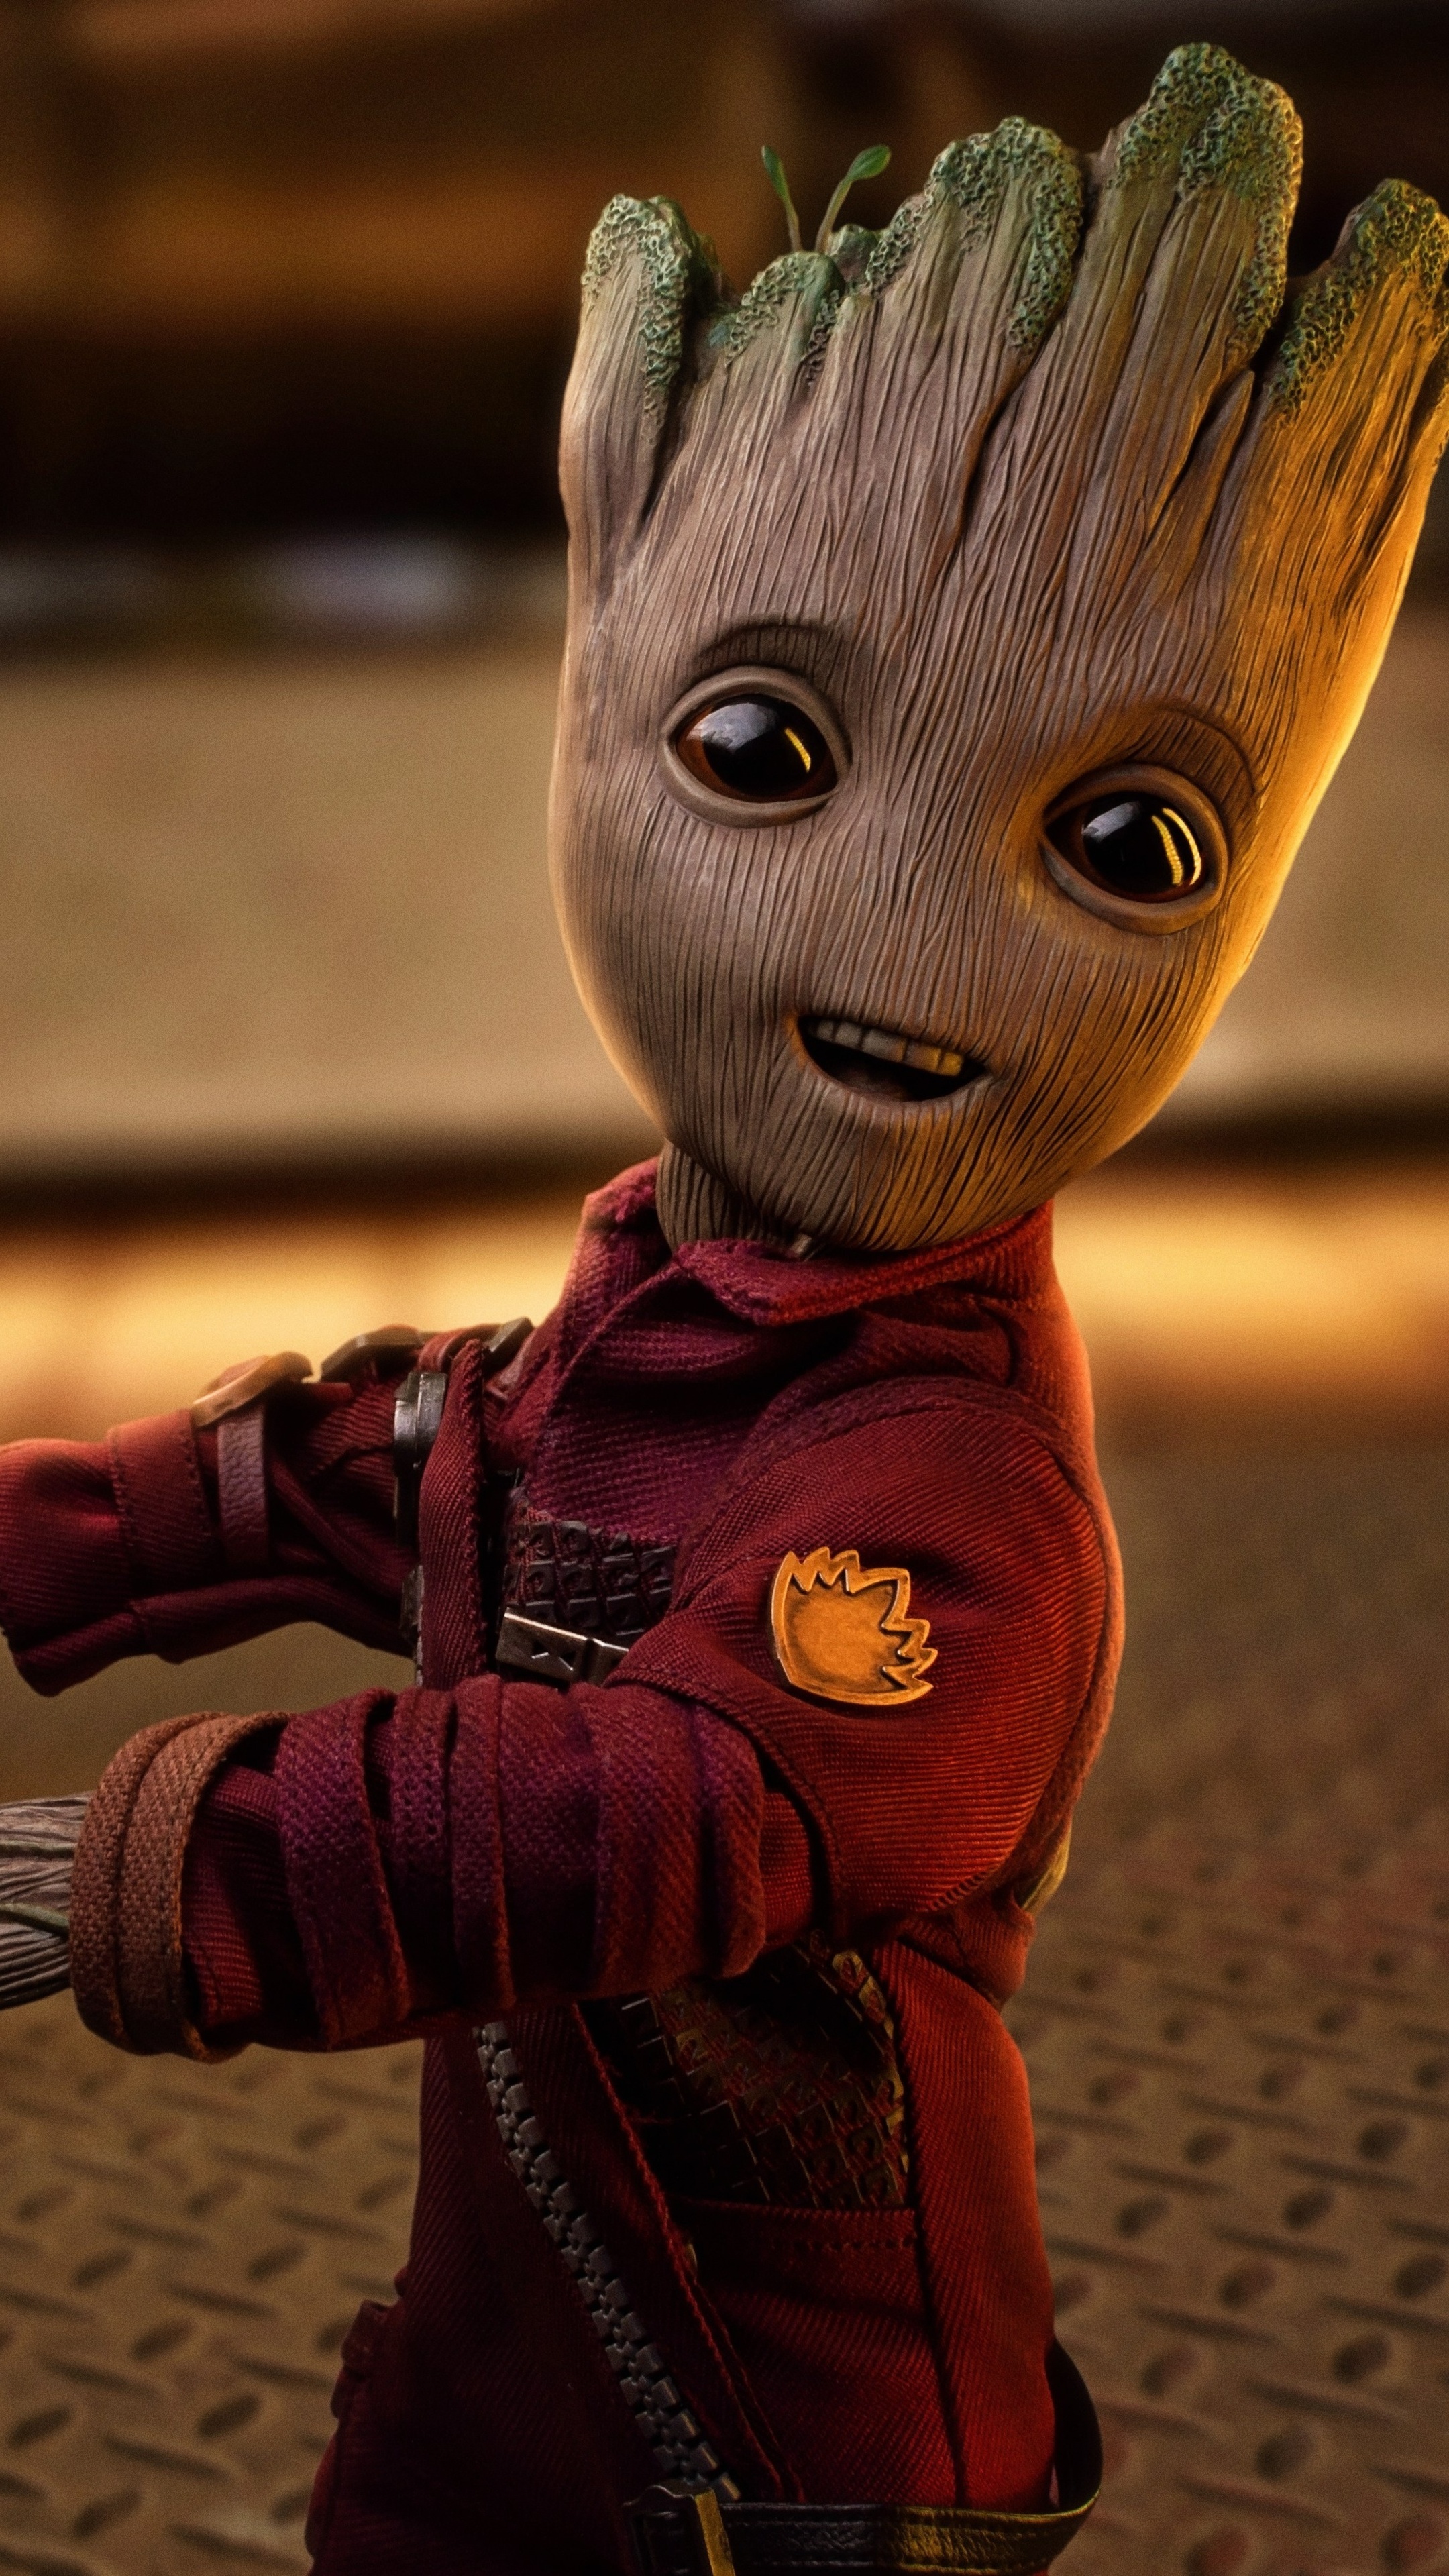 Baby Groot, 5K resolution, Artwork, Sony Xperia, Amazing wallpapers, 2160x3840 4K Handy